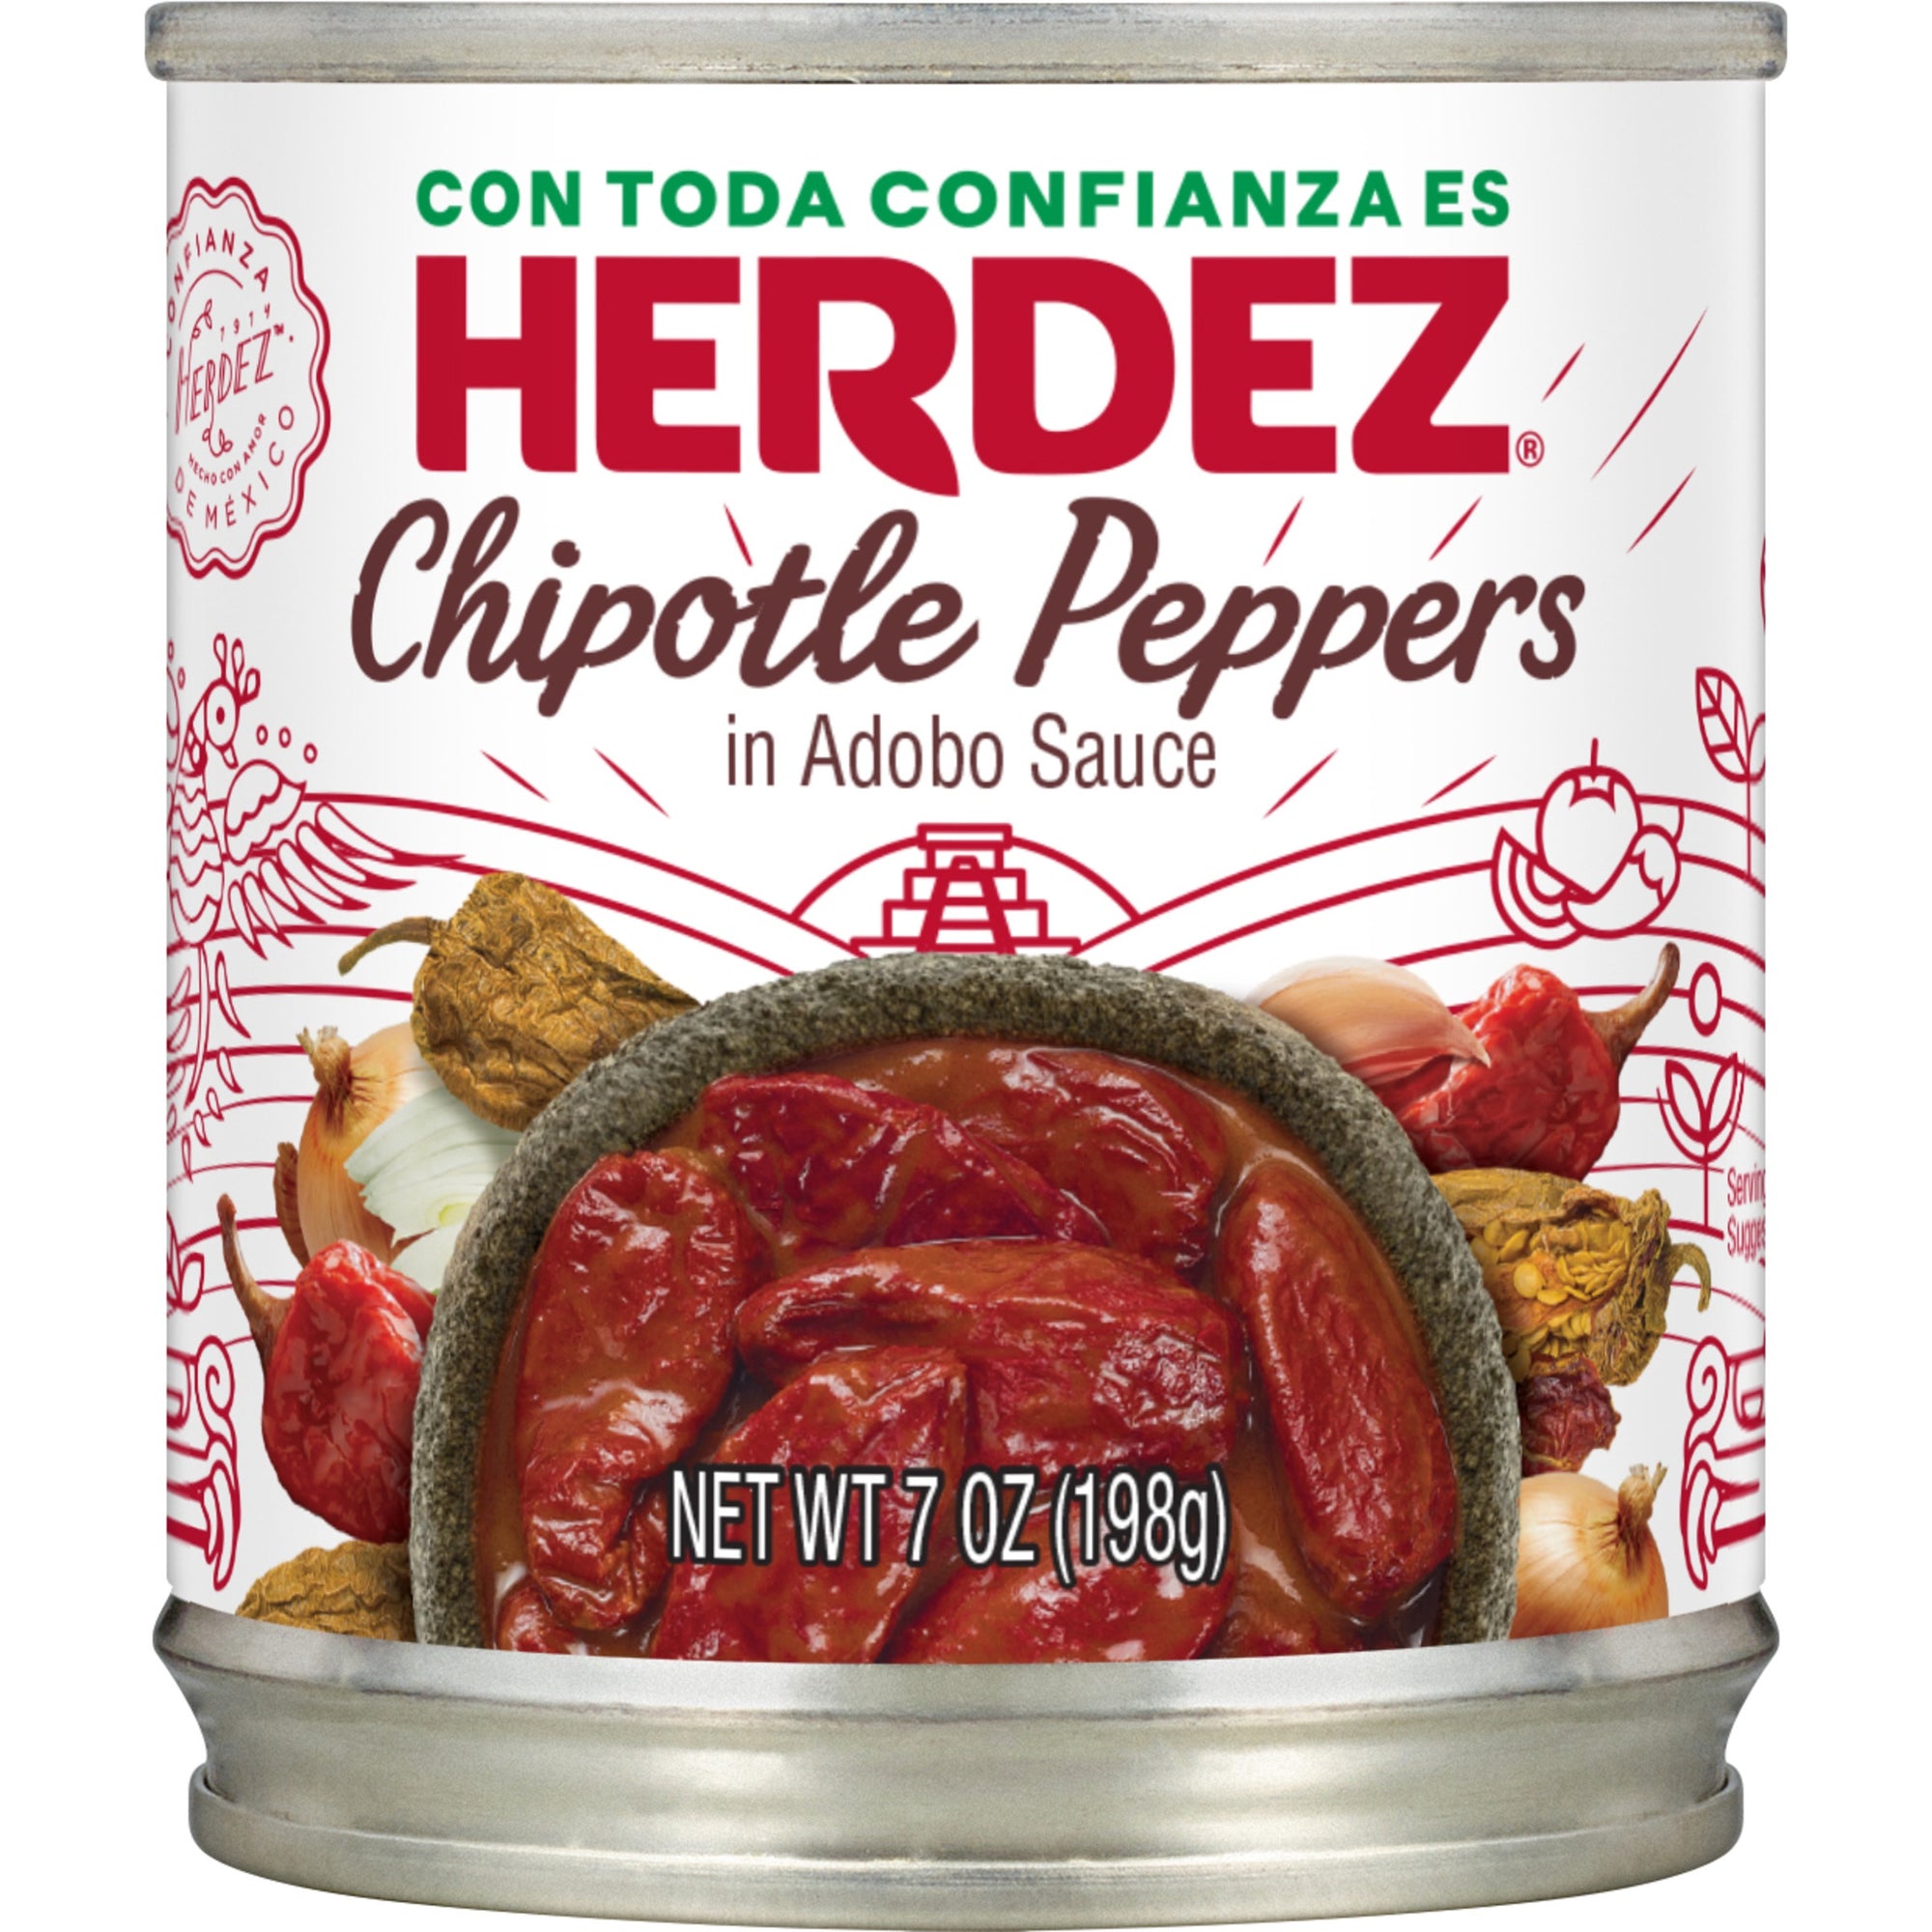 Herdez Chipotle Peppers in Adobo Sauce